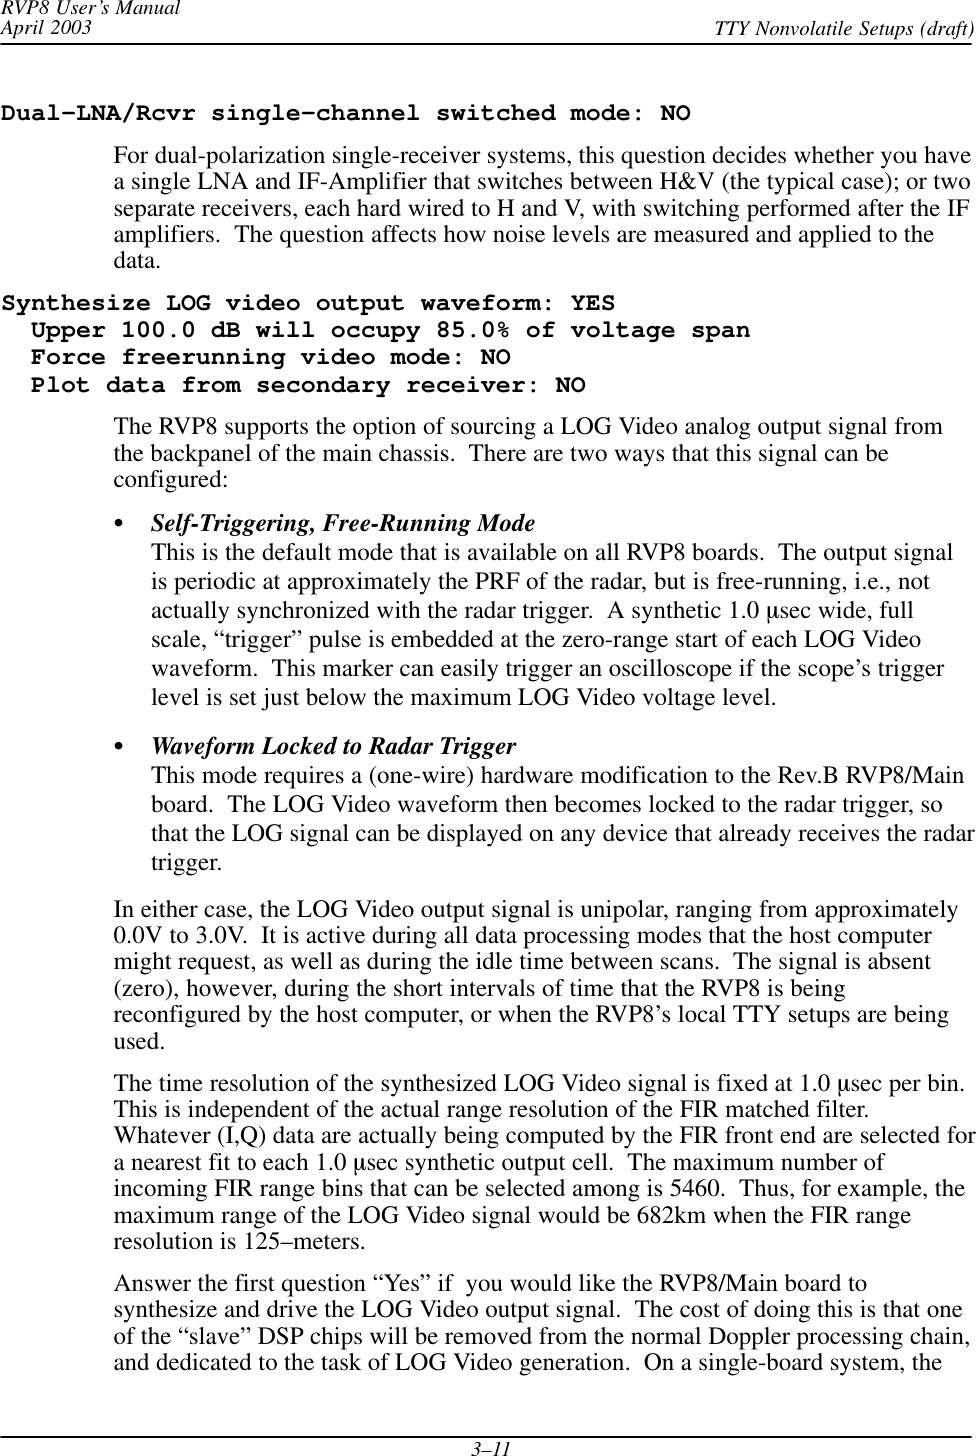 RVP8 User’s ManualApril 2003 TTY Nonvolatile Setups (draft)3–11Dual–LNA/Rcvr single–channel switched mode: NOFor dual-polarization single-receiver systems, this question decides whether you havea single LNA and IF-Amplifier that switches between H&amp;V (the typical case); or twoseparate receivers, each hard wired to H and V, with switching performed after the IFamplifiers.  The question affects how noise levels are measured and applied to thedata.Synthesize LOG video output waveform: YES  Upper 100.0 dB will occupy 85.0% of voltage span  Force freerunning video mode: NO  Plot data from secondary receiver: NOThe RVP8 supports the option of sourcing a LOG Video analog output signal fromthe backpanel of the main chassis.  There are two ways that this signal can beconfigured:Self-Triggering, Free-Running ModeThis is the default mode that is available on all RVP8 boards.  The output signalis periodic at approximately the PRF of the radar, but is free-running, i.e., notactually synchronized with the radar trigger.  A synthetic 1.0 sec wide, fullscale, “trigger” pulse is embedded at the zero-range start of each LOG Videowaveform.  This marker can easily trigger an oscilloscope if the scope’s triggerlevel is set just below the maximum LOG Video voltage level.Waveform Locked to Radar TriggerThis mode requires a (one-wire) hardware modification to the Rev.B RVP8/Mainboard.  The LOG Video waveform then becomes locked to the radar trigger, sothat the LOG signal can be displayed on any device that already receives the radartrigger.In either case, the LOG Video output signal is unipolar, ranging from approximately0.0V to 3.0V.  It is active during all data processing modes that the host computermight request, as well as during the idle time between scans.  The signal is absent(zero), however, during the short intervals of time that the RVP8 is beingreconfigured by the host computer, or when the RVP8’s local TTY setups are beingused.The time resolution of the synthesized LOG Video signal is fixed at 1.0 sec per bin.This is independent of the actual range resolution of the FIR matched filter.Whatever (I,Q) data are actually being computed by the FIR front end are selected fora nearest fit to each 1.0 sec synthetic output cell.  The maximum number ofincoming FIR range bins that can be selected among is 5460.  Thus, for example, themaximum range of the LOG Video signal would be 682km when the FIR rangeresolution is 125–meters.Answer the first question “Yes” if  you would like the RVP8/Main board tosynthesize and drive the LOG Video output signal.  The cost of doing this is that oneof the “slave” DSP chips will be removed from the normal Doppler processing chain,and dedicated to the task of LOG Video generation.  On a single-board system, the